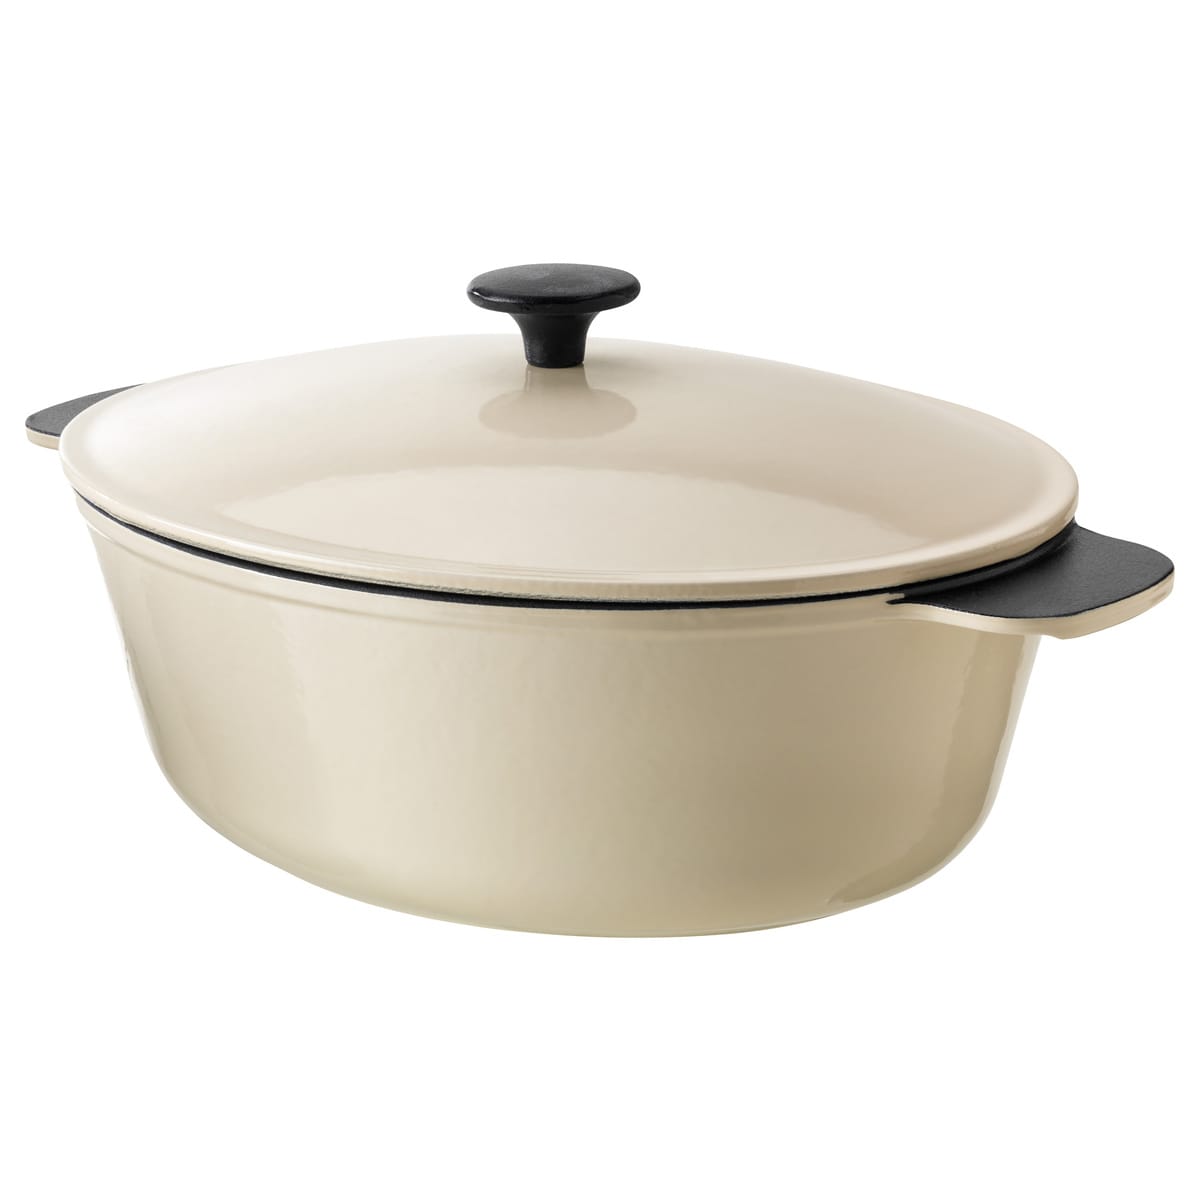 Lodge Dutch oven: Get this top-notch cookware in a bundled set for under $50